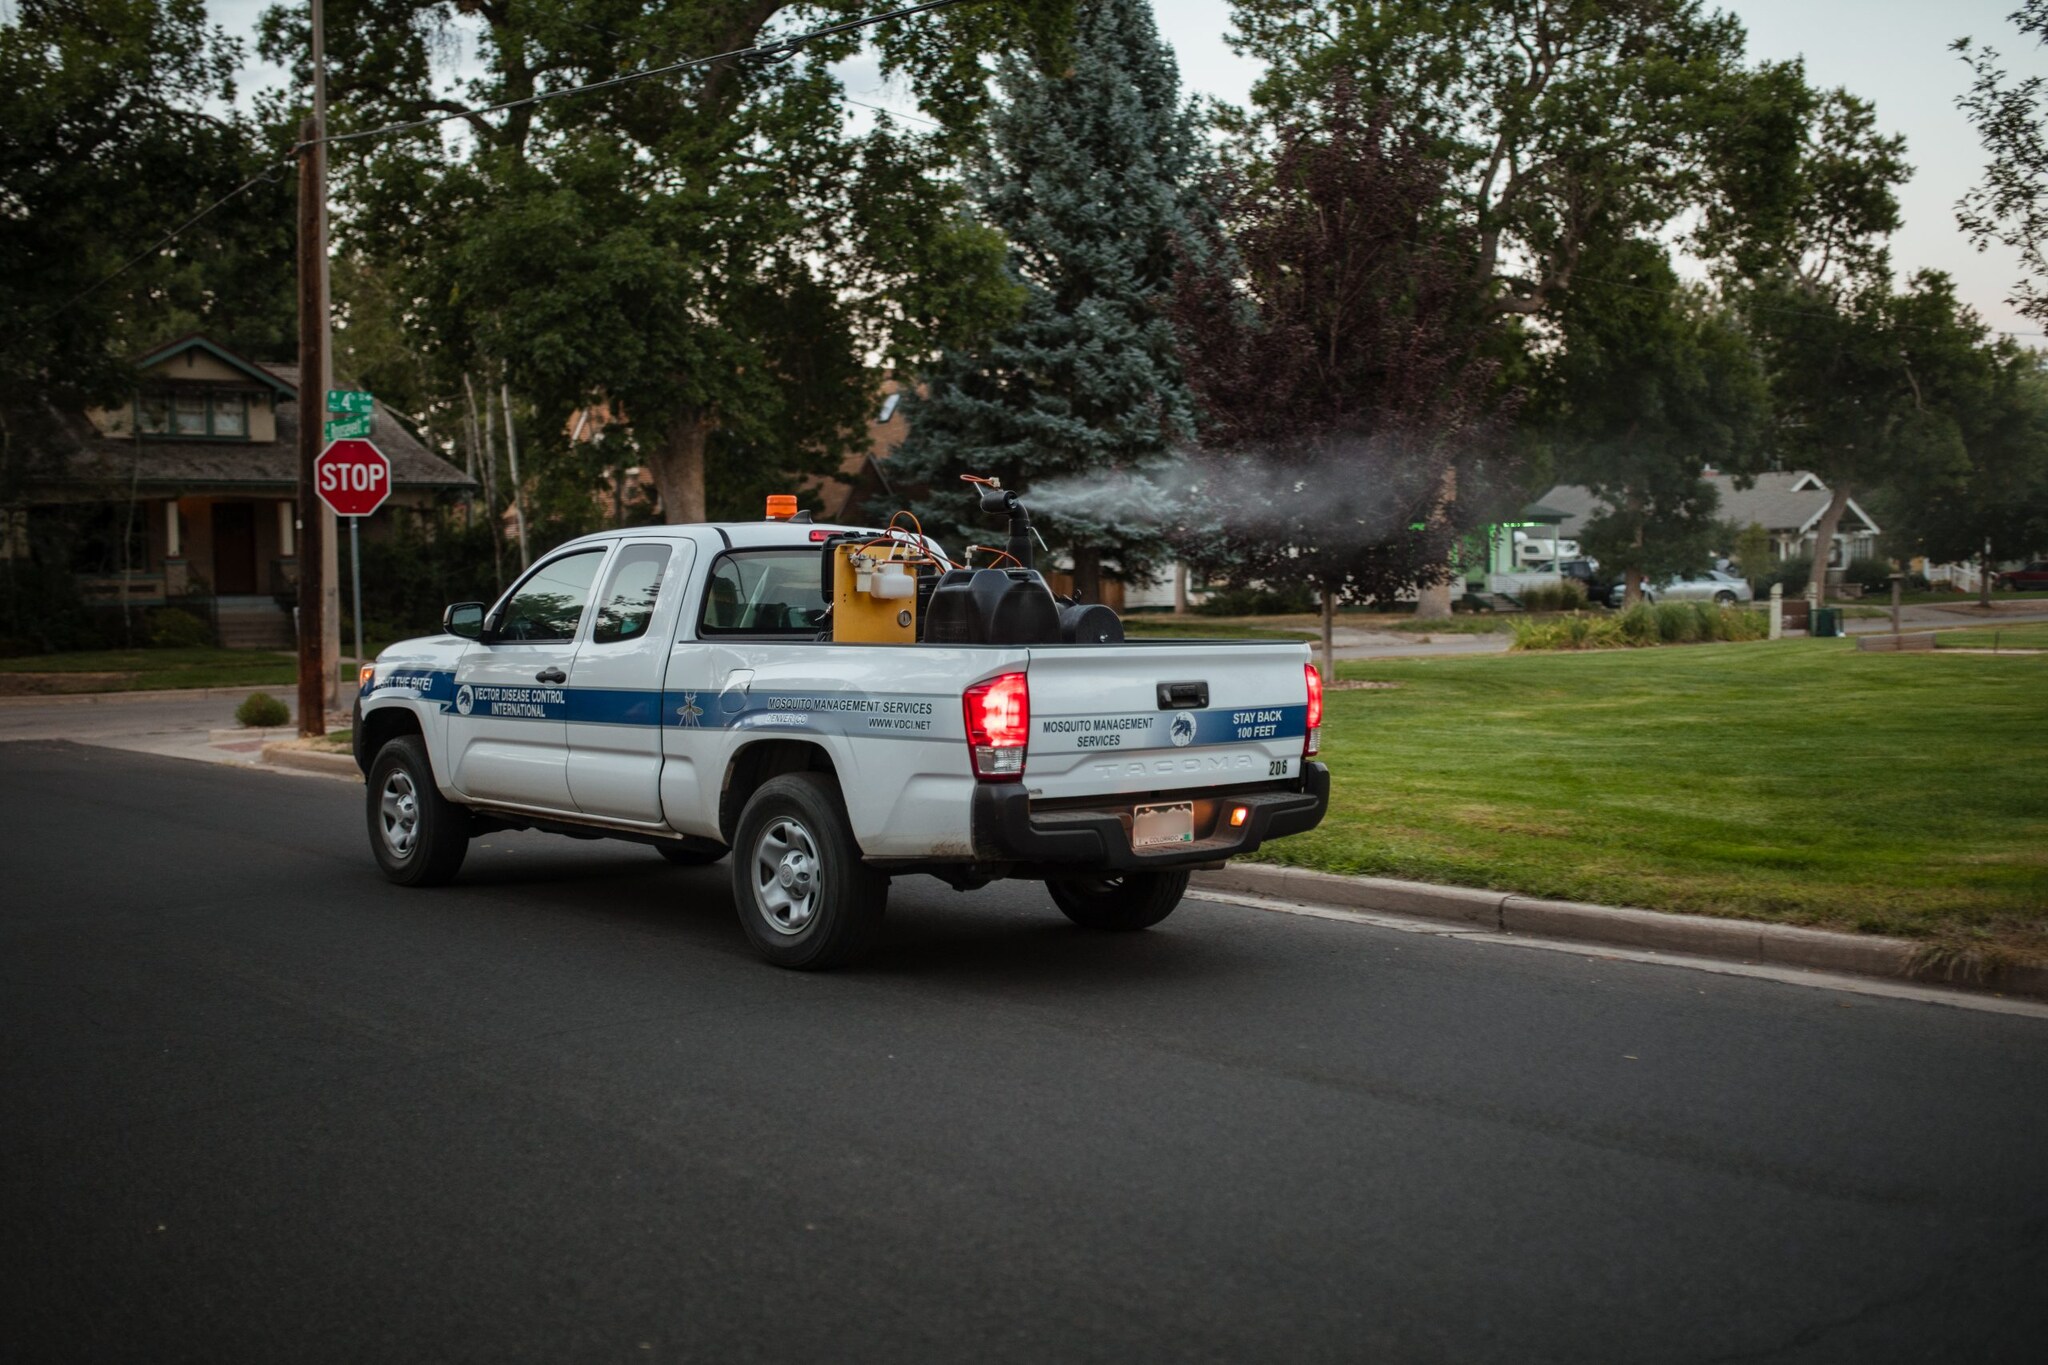 mosquito control truck with sprayer to apply insecticides or larvicides